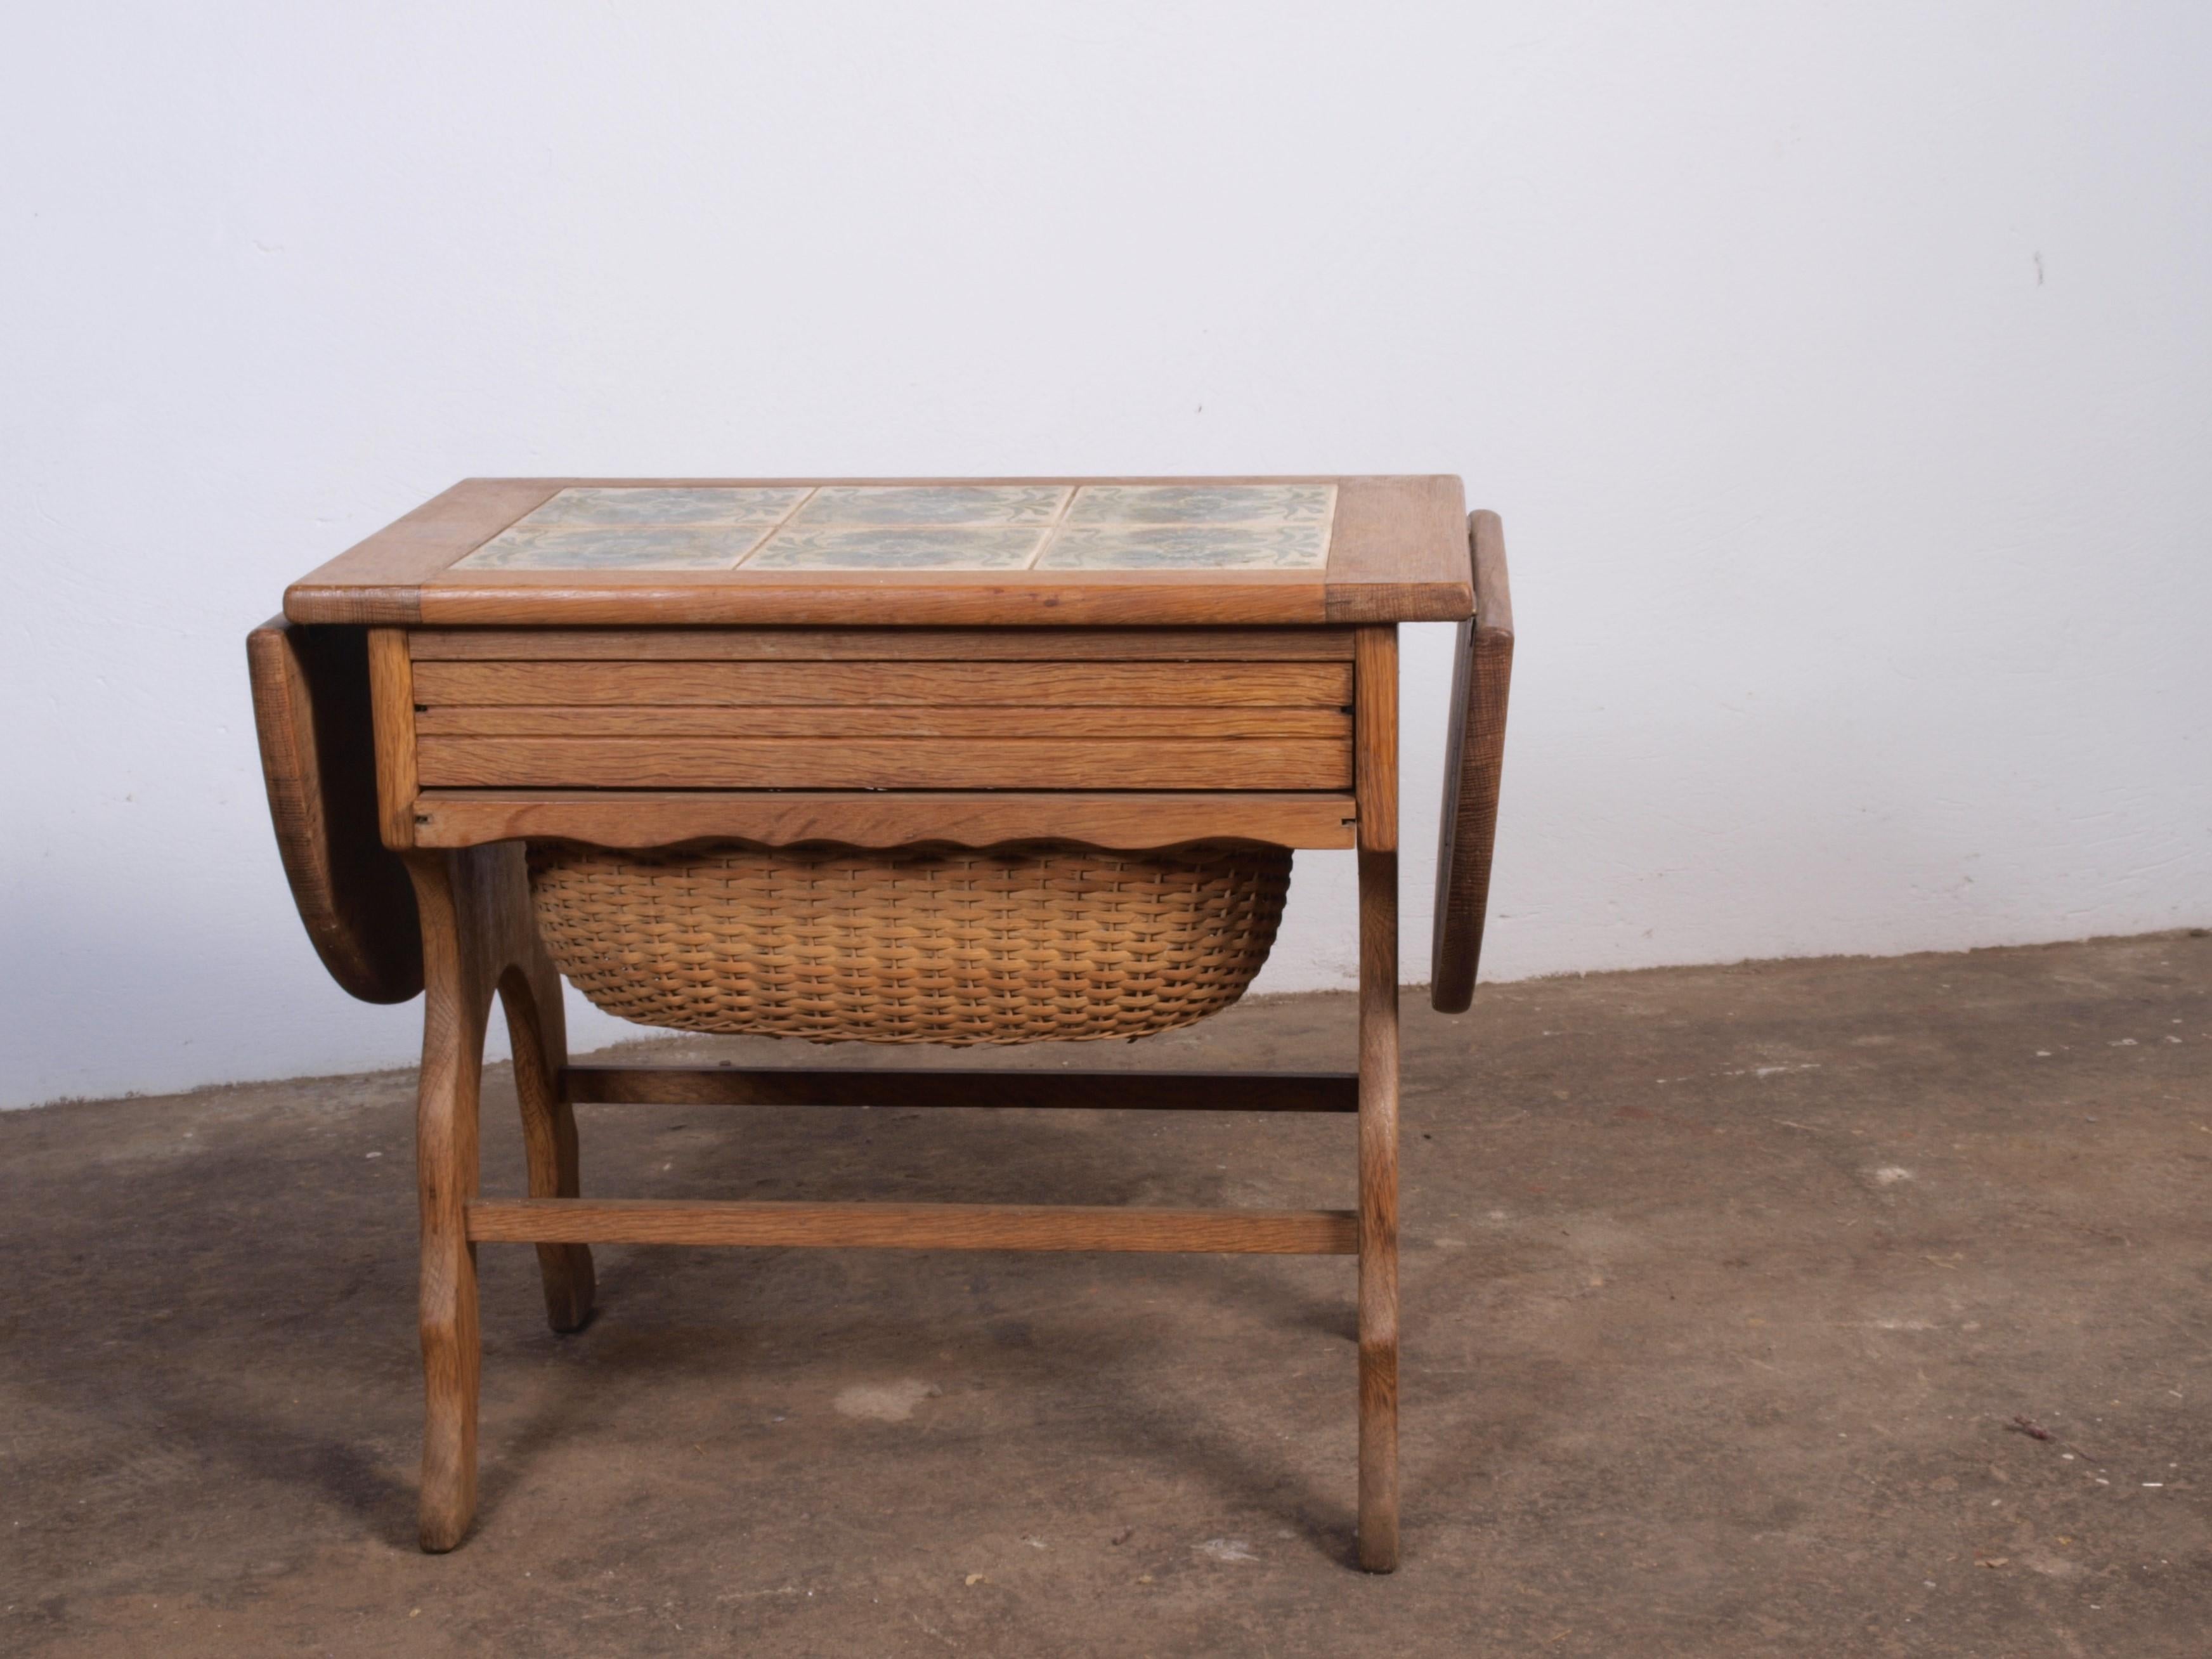 This Danish sewing table, crafted in the 1960s from sturdy oak with a tiled top, showcases solid craftsmanship. Featuring a drawer with storage and an extendable wicker basket, it adapts to various uses. The table's size adjusts from 60 cm to 84 cm,